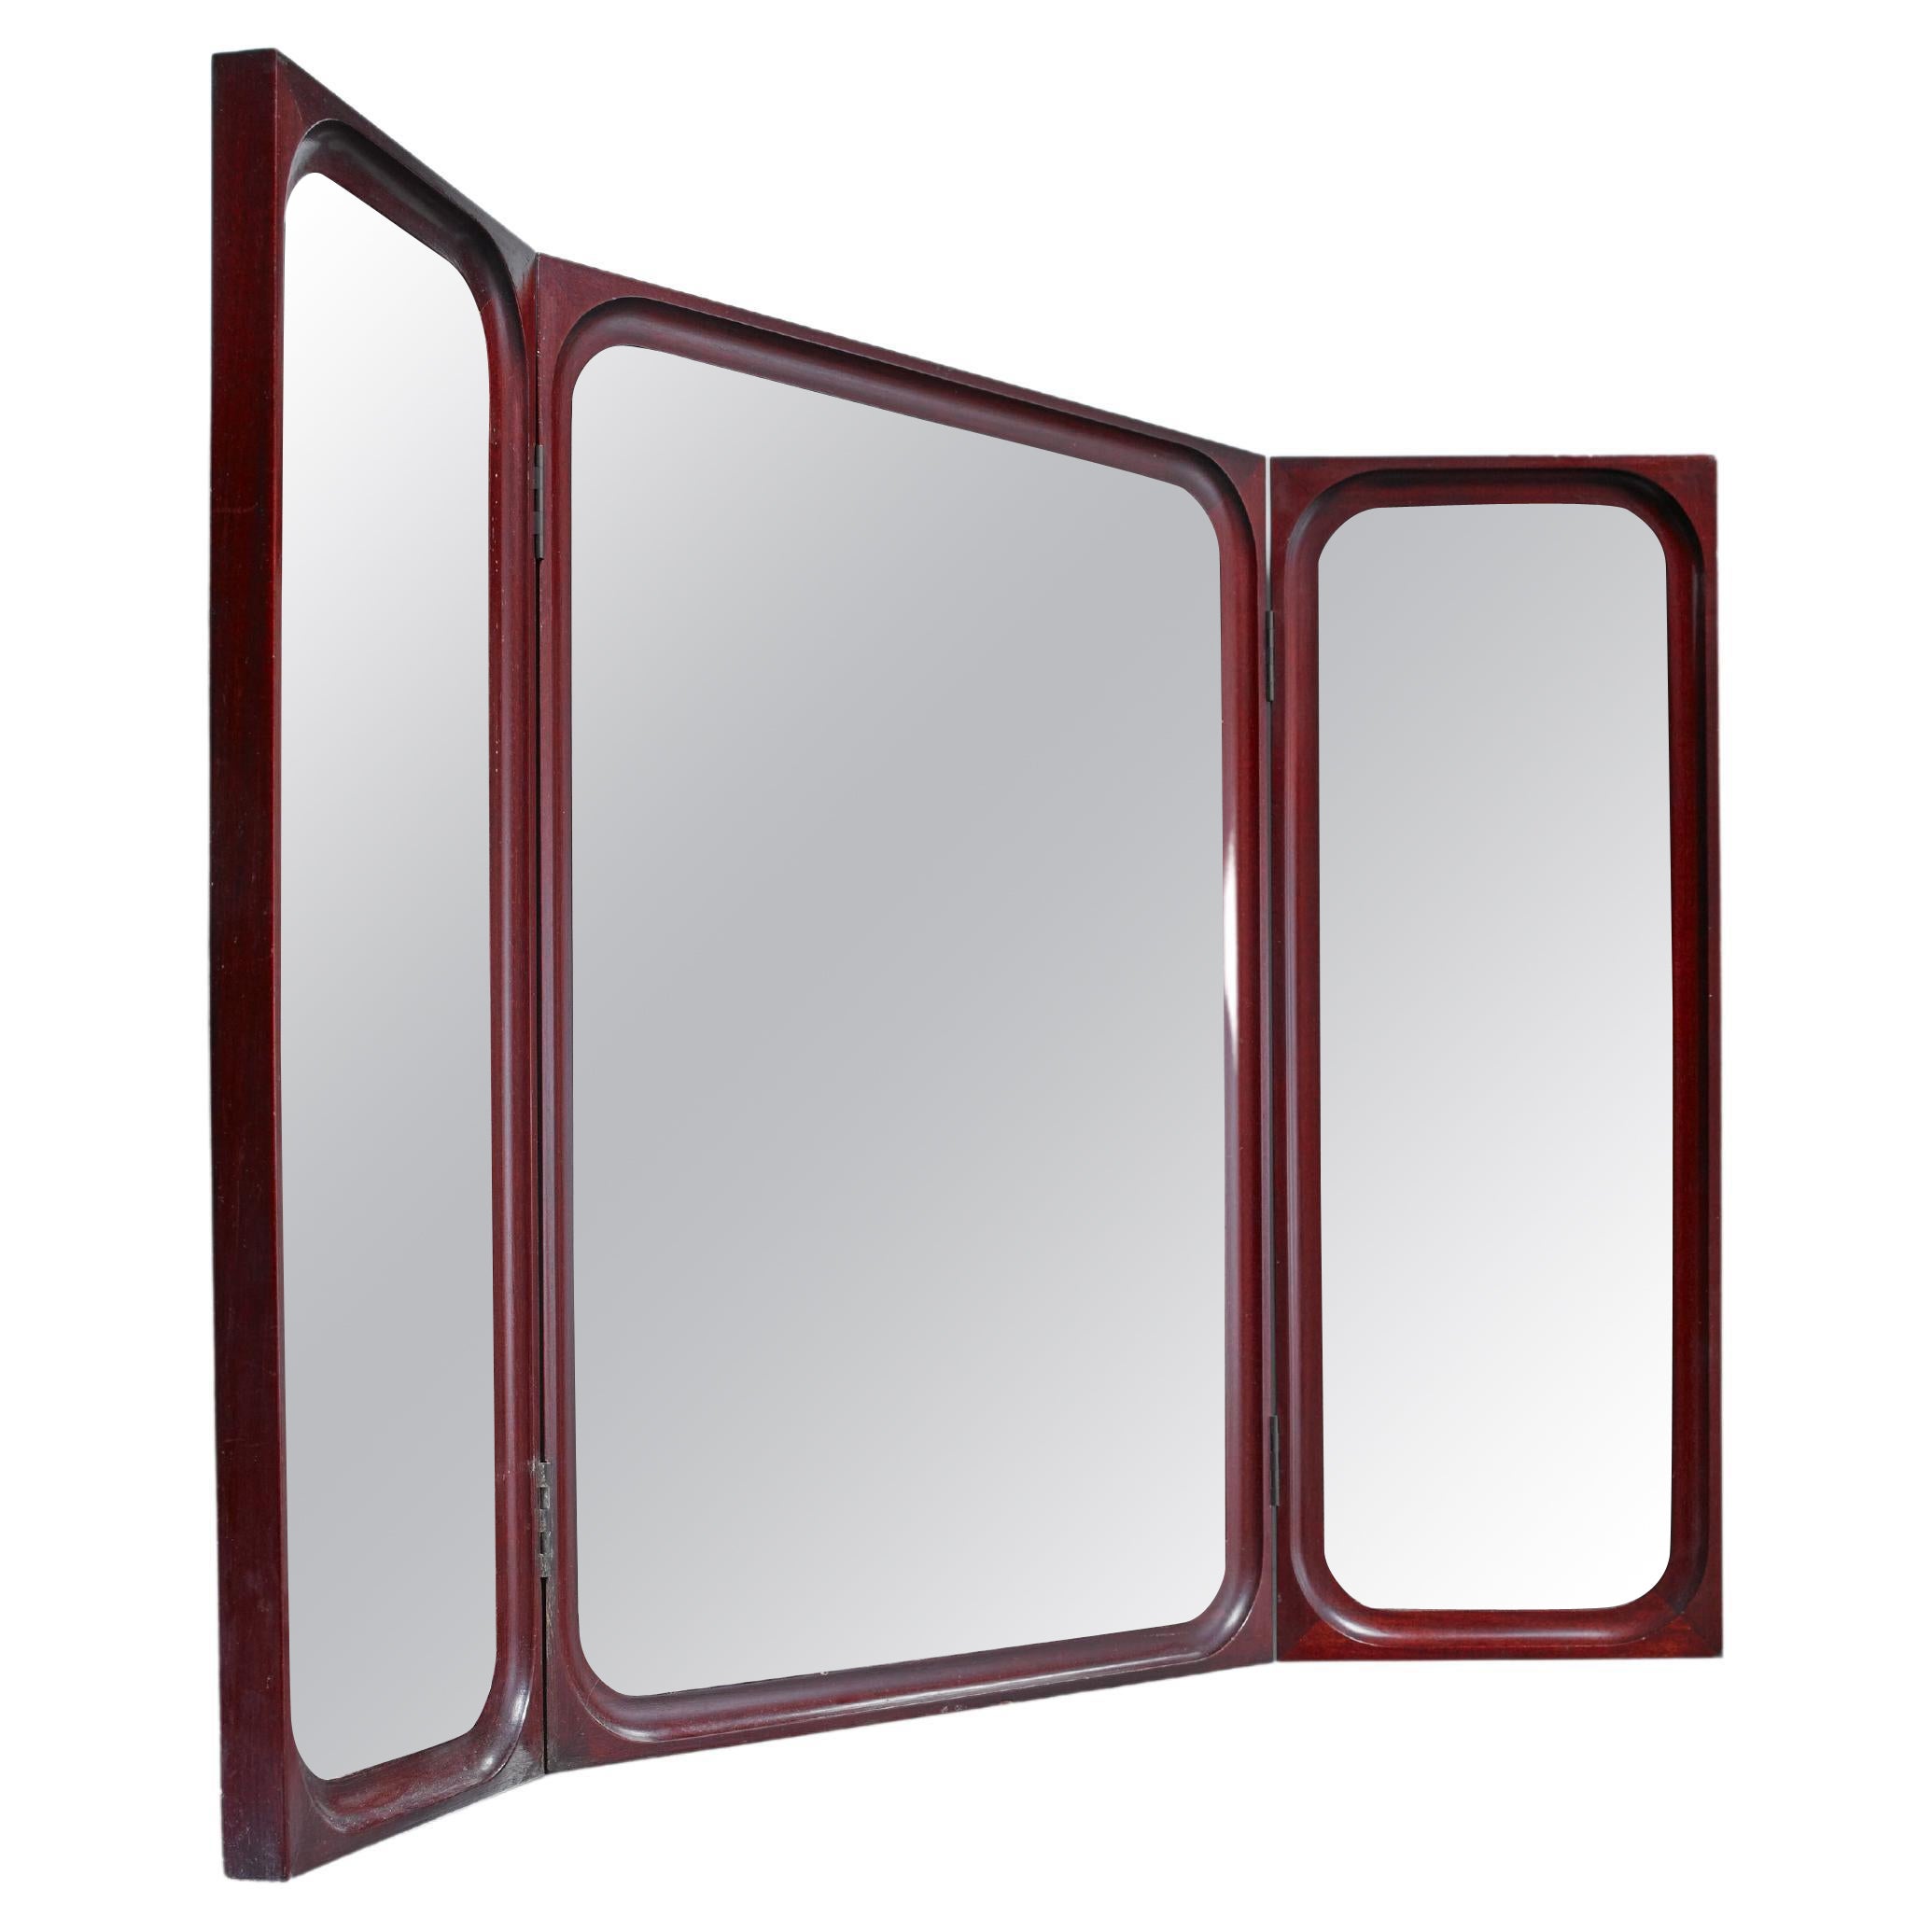 Frode Holm Fold-Out Triptych Wall Mirror for Illums Bolighus, Denmark, 1950s For Sale